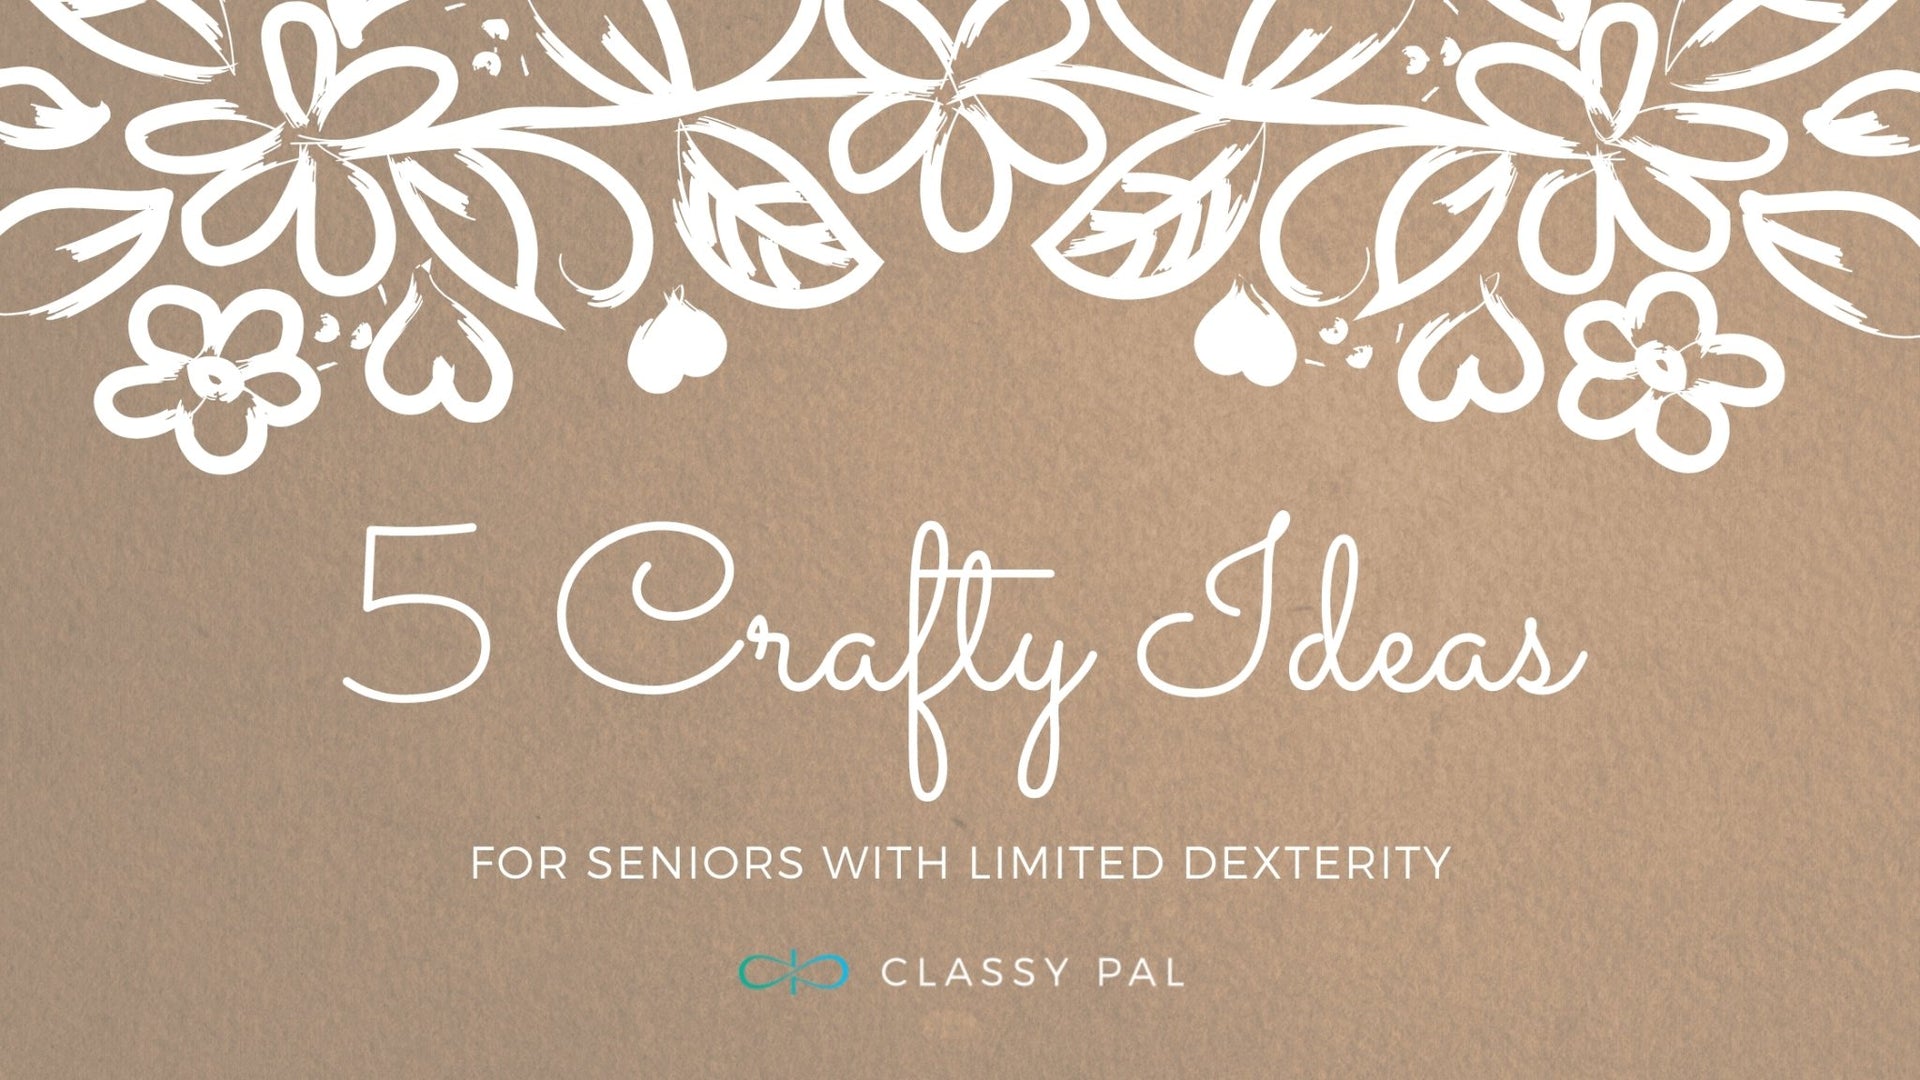 Five Crafty Ideas for Seniors with Limited Dexterity | Classy Pal